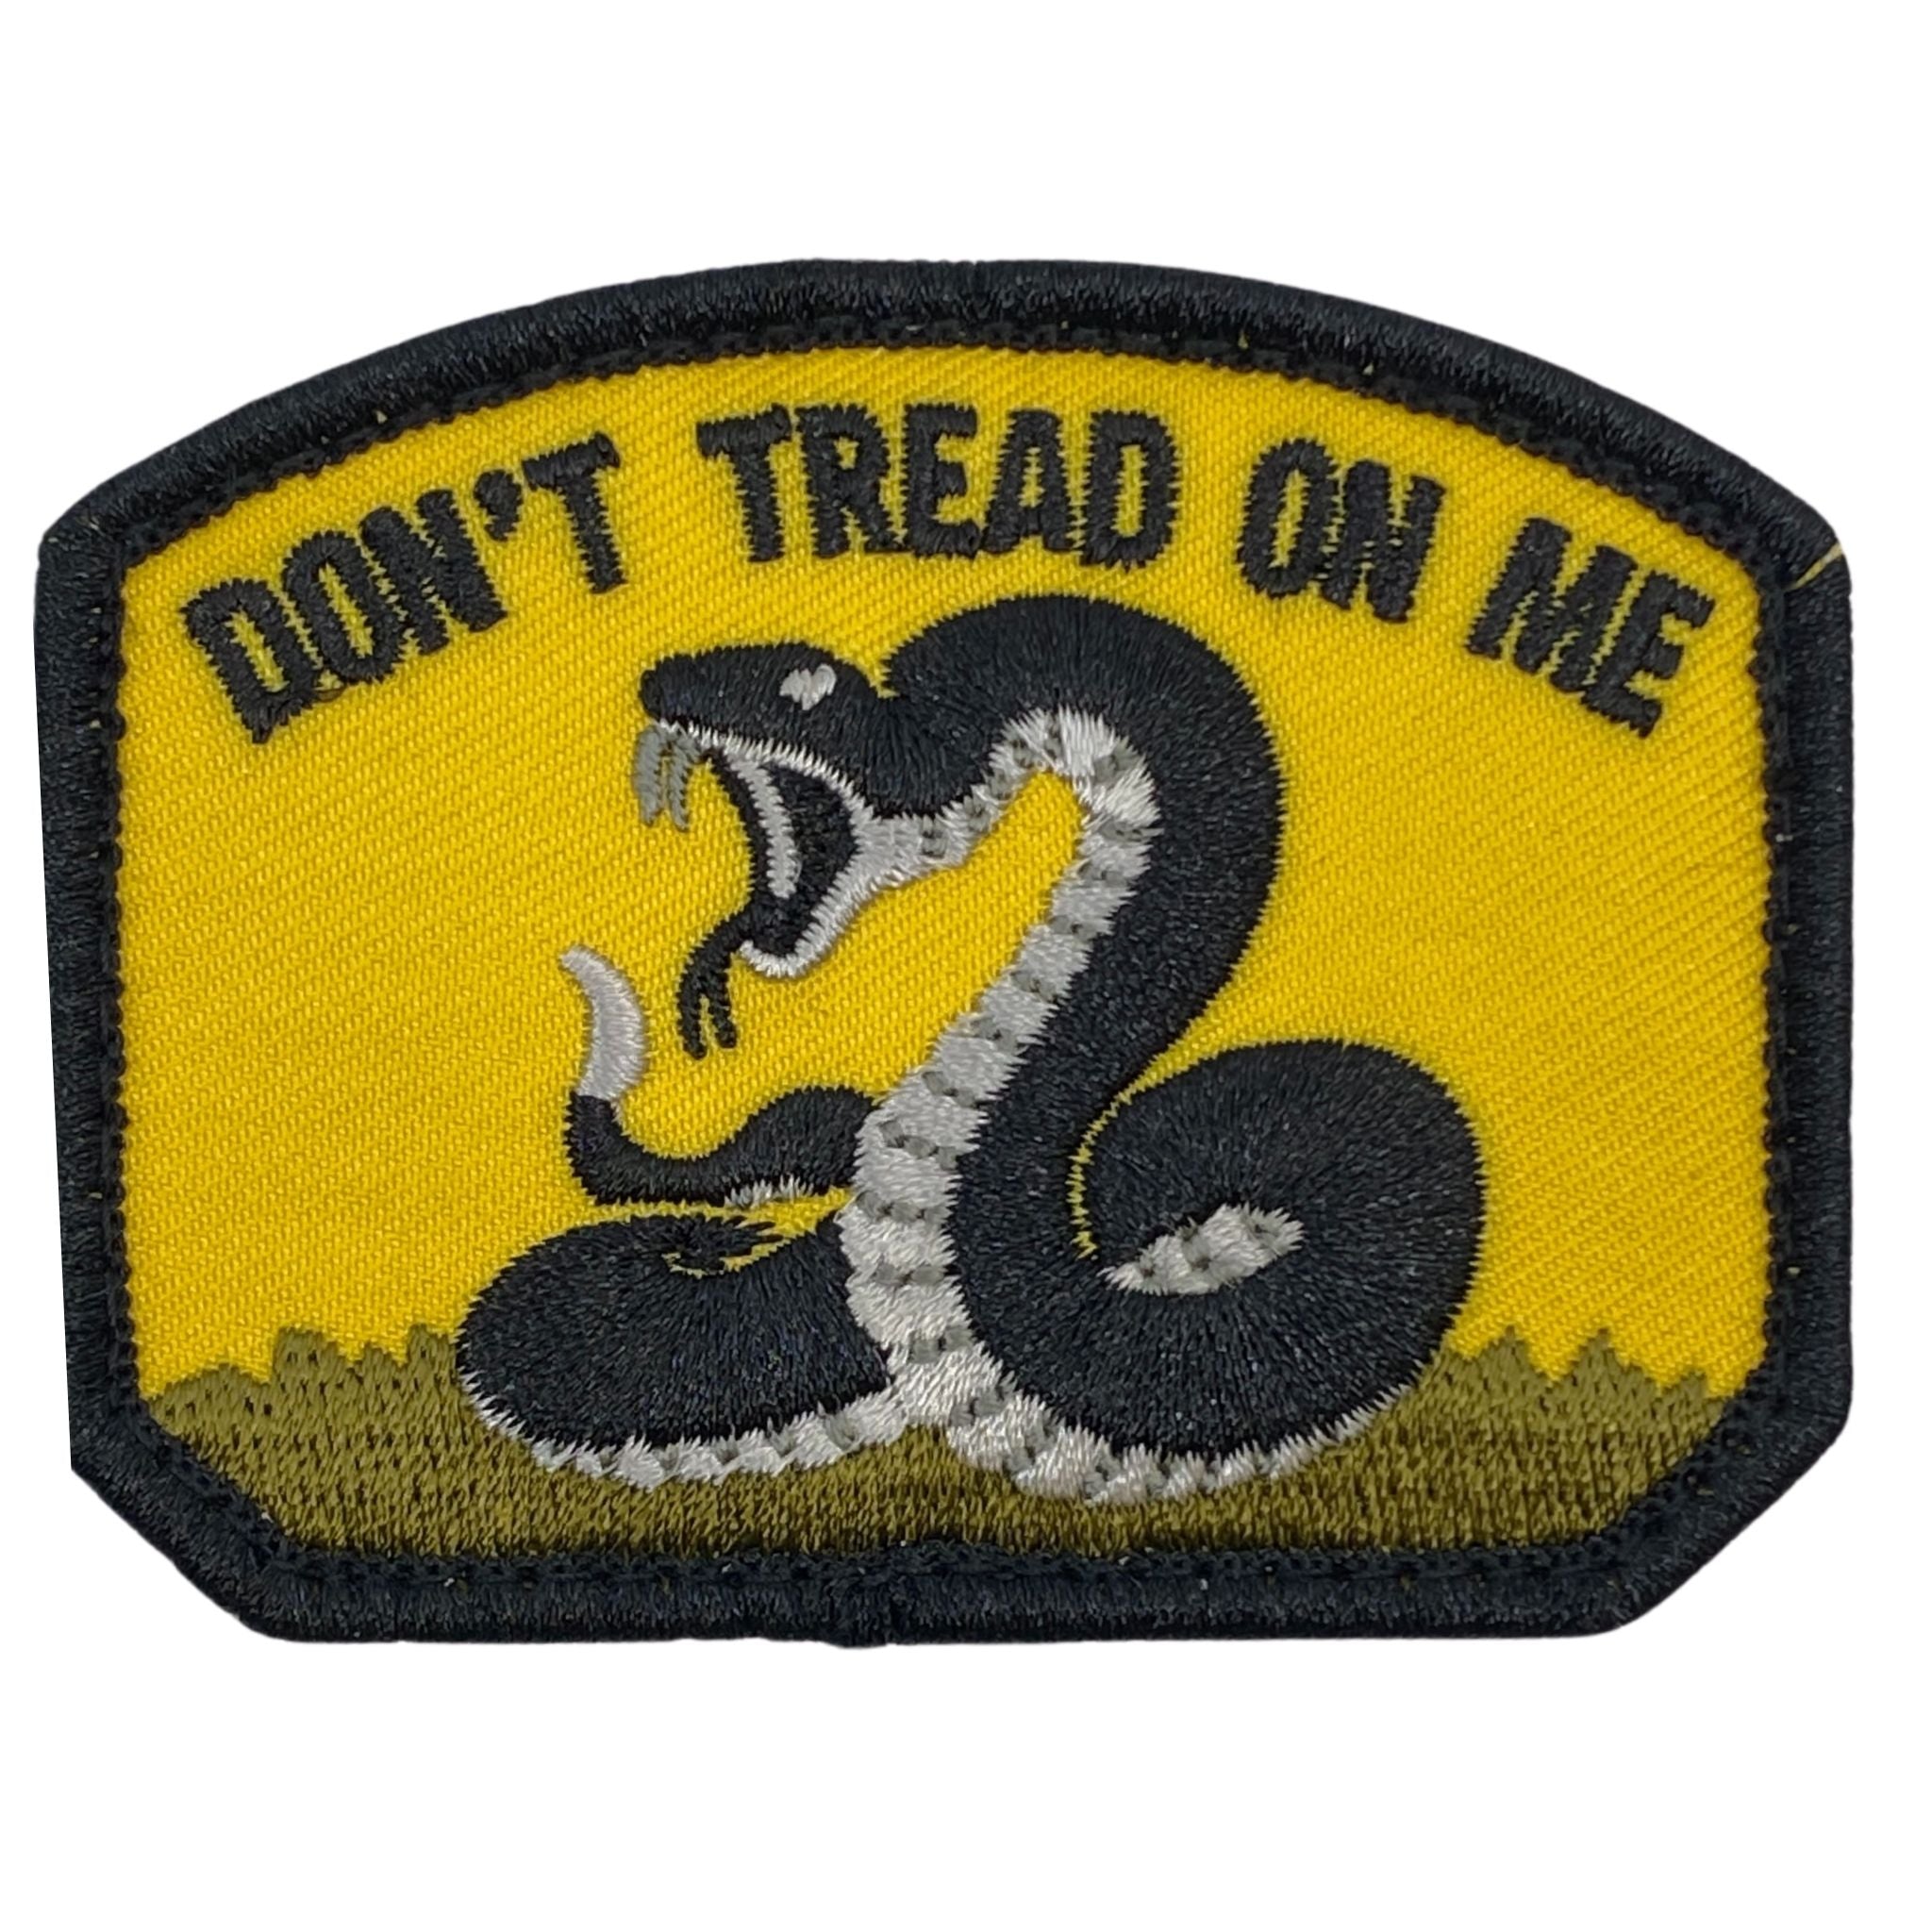 Red Serpent PVC patch